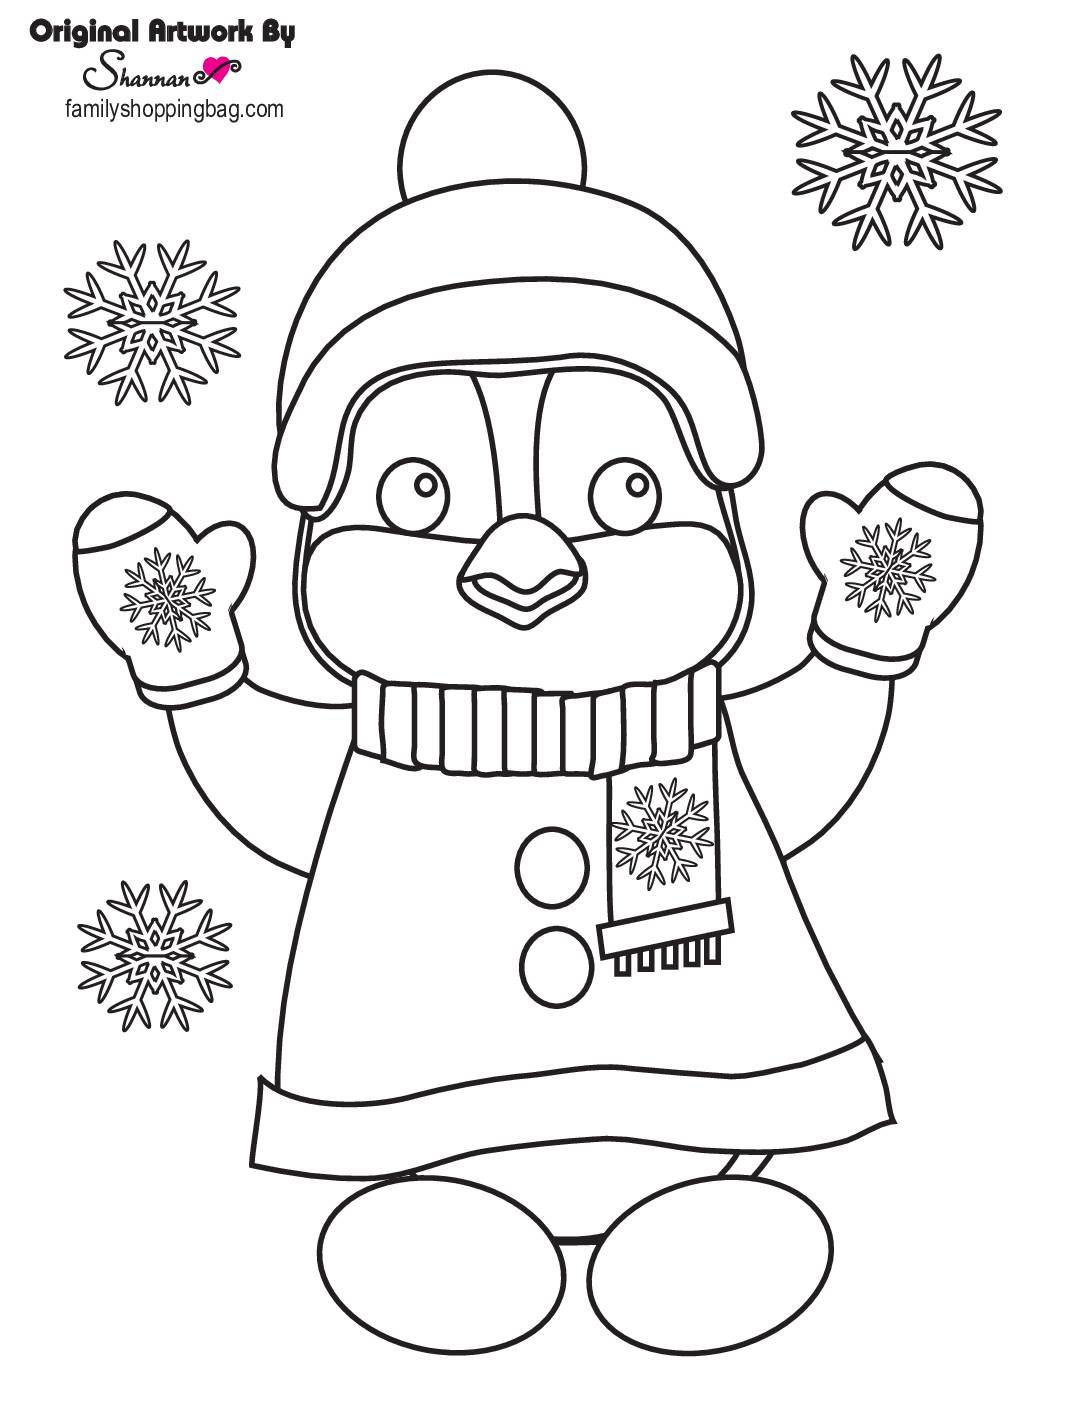 Coloring Page5 Coloring Pages